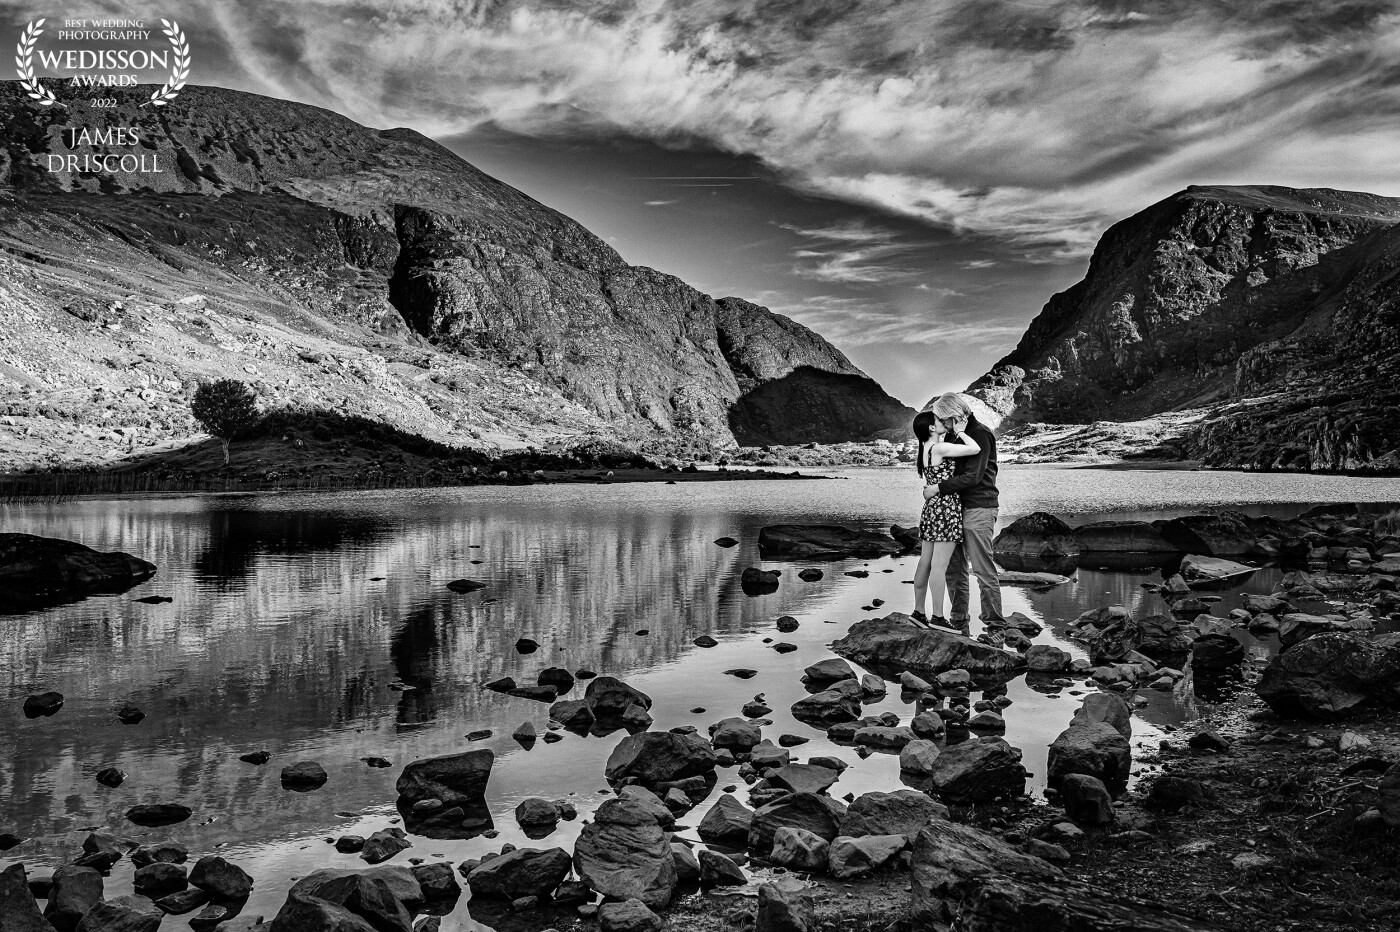 Suprise Enagement at the iconic Gap of dunloe in County Kerry. <br />
Waiting on the wishing bridge with no cover I was moments before the couple arrived. Managed to talk to motorcyclists into stopping and just start chatting with me as i told them the story of what was going down.  The couple arrived and once down on bended knee the camera came out from behind my jacket, and we went from there..